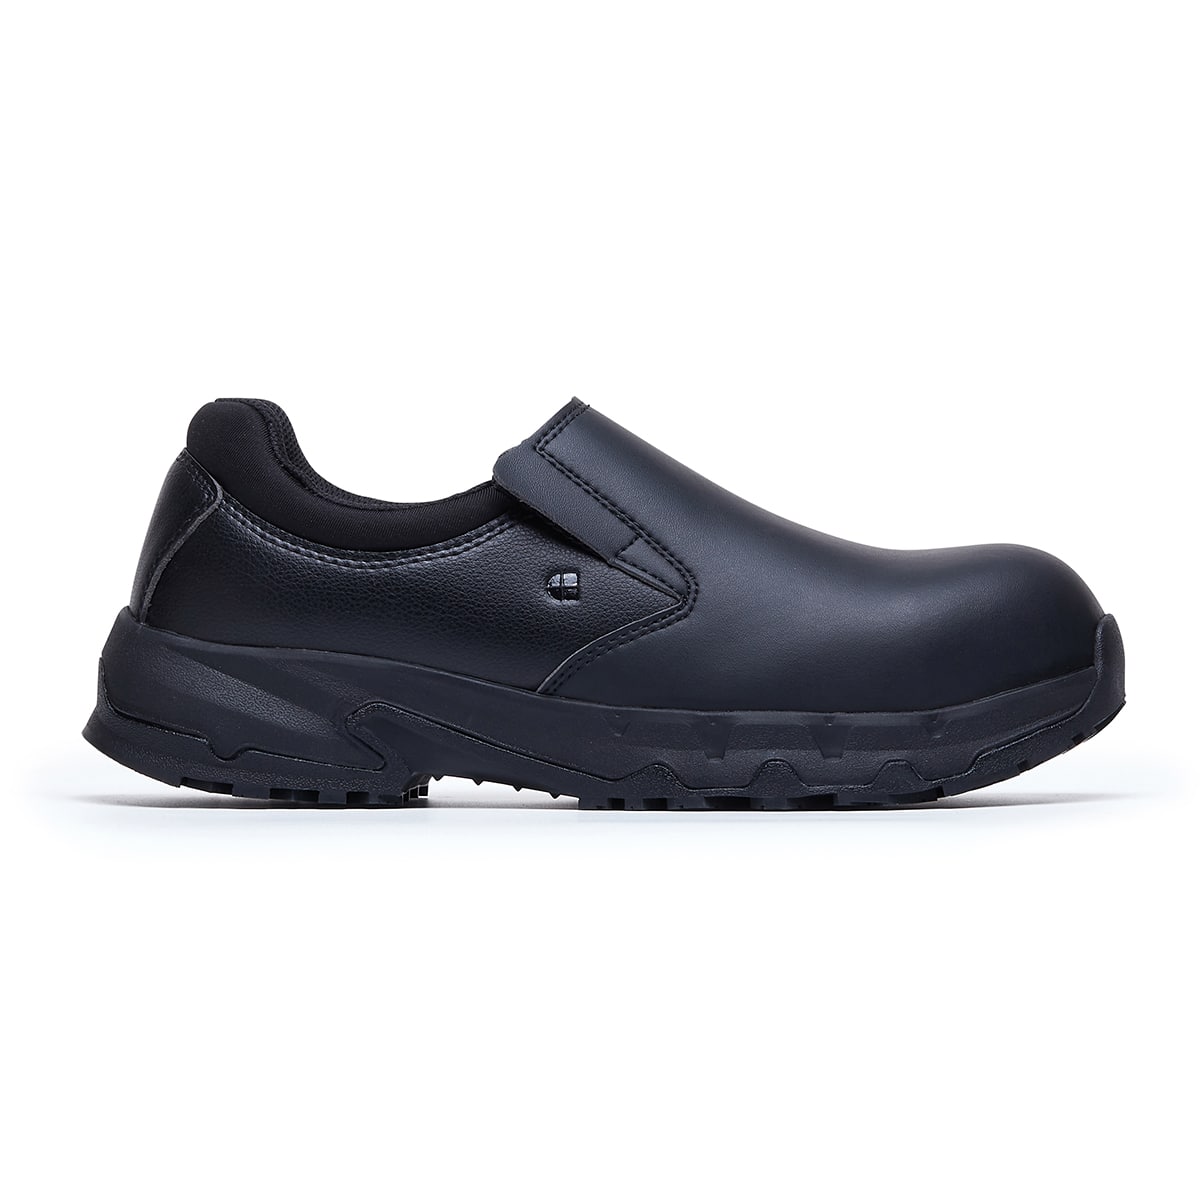 The Brandon Black slip-on shoe has a slip-resistant sole, a waterproof microfibre upper and a nano-composite toecap (joules), seen on the right.